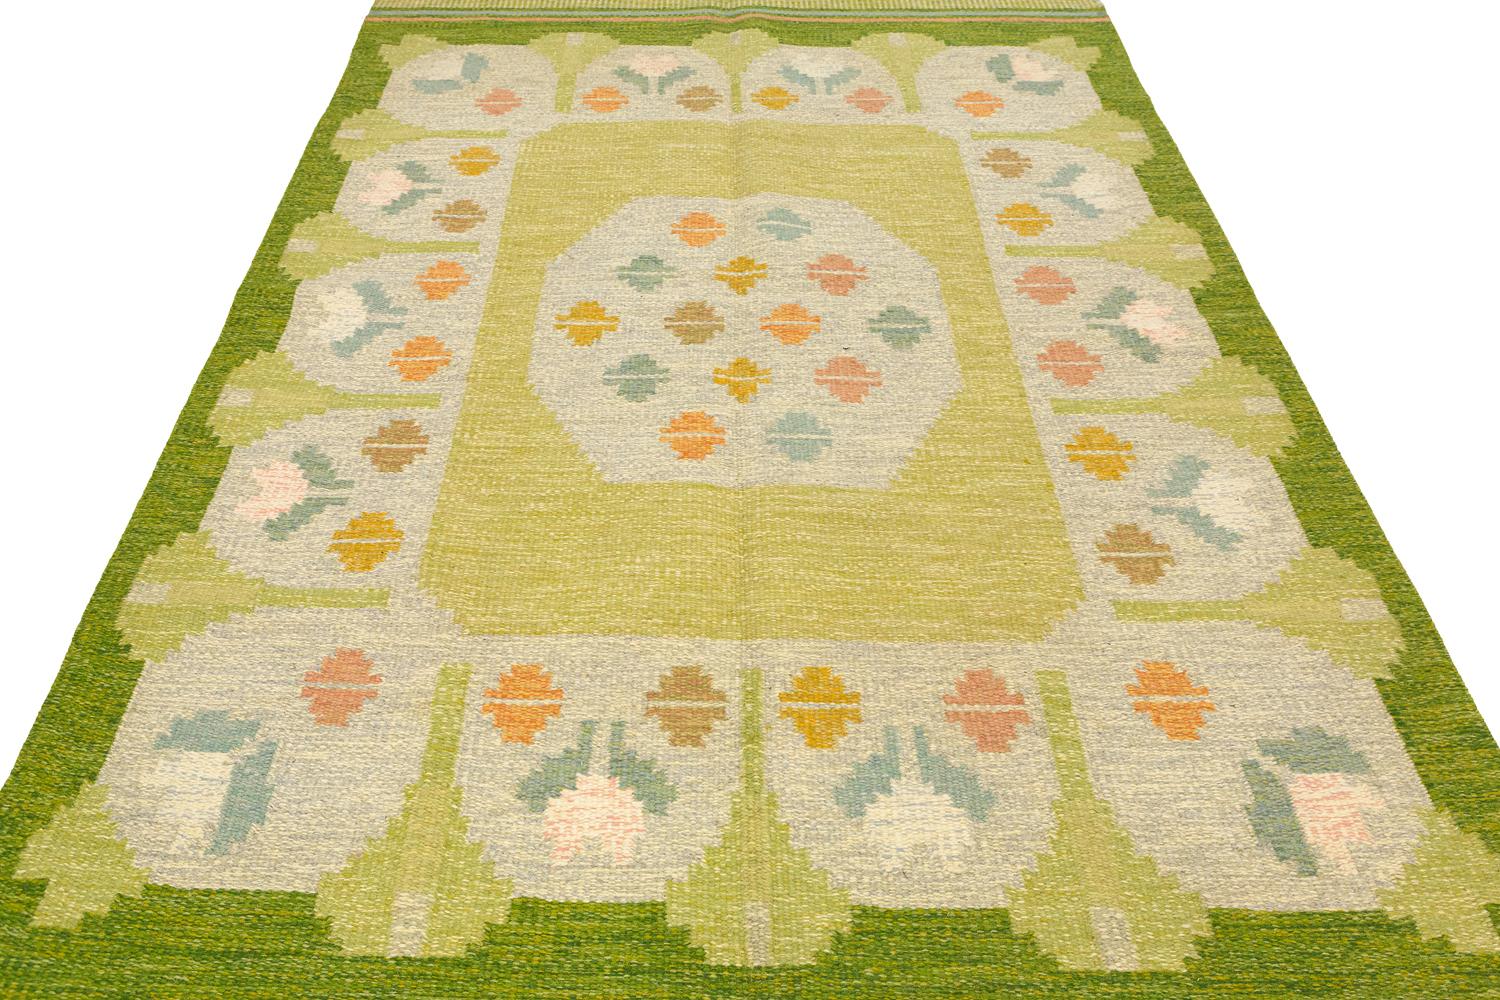 Hand-Knotted Vintage Swedish Flat-Weave Kilim by Anna Joanna Angstrom, ca. 1950